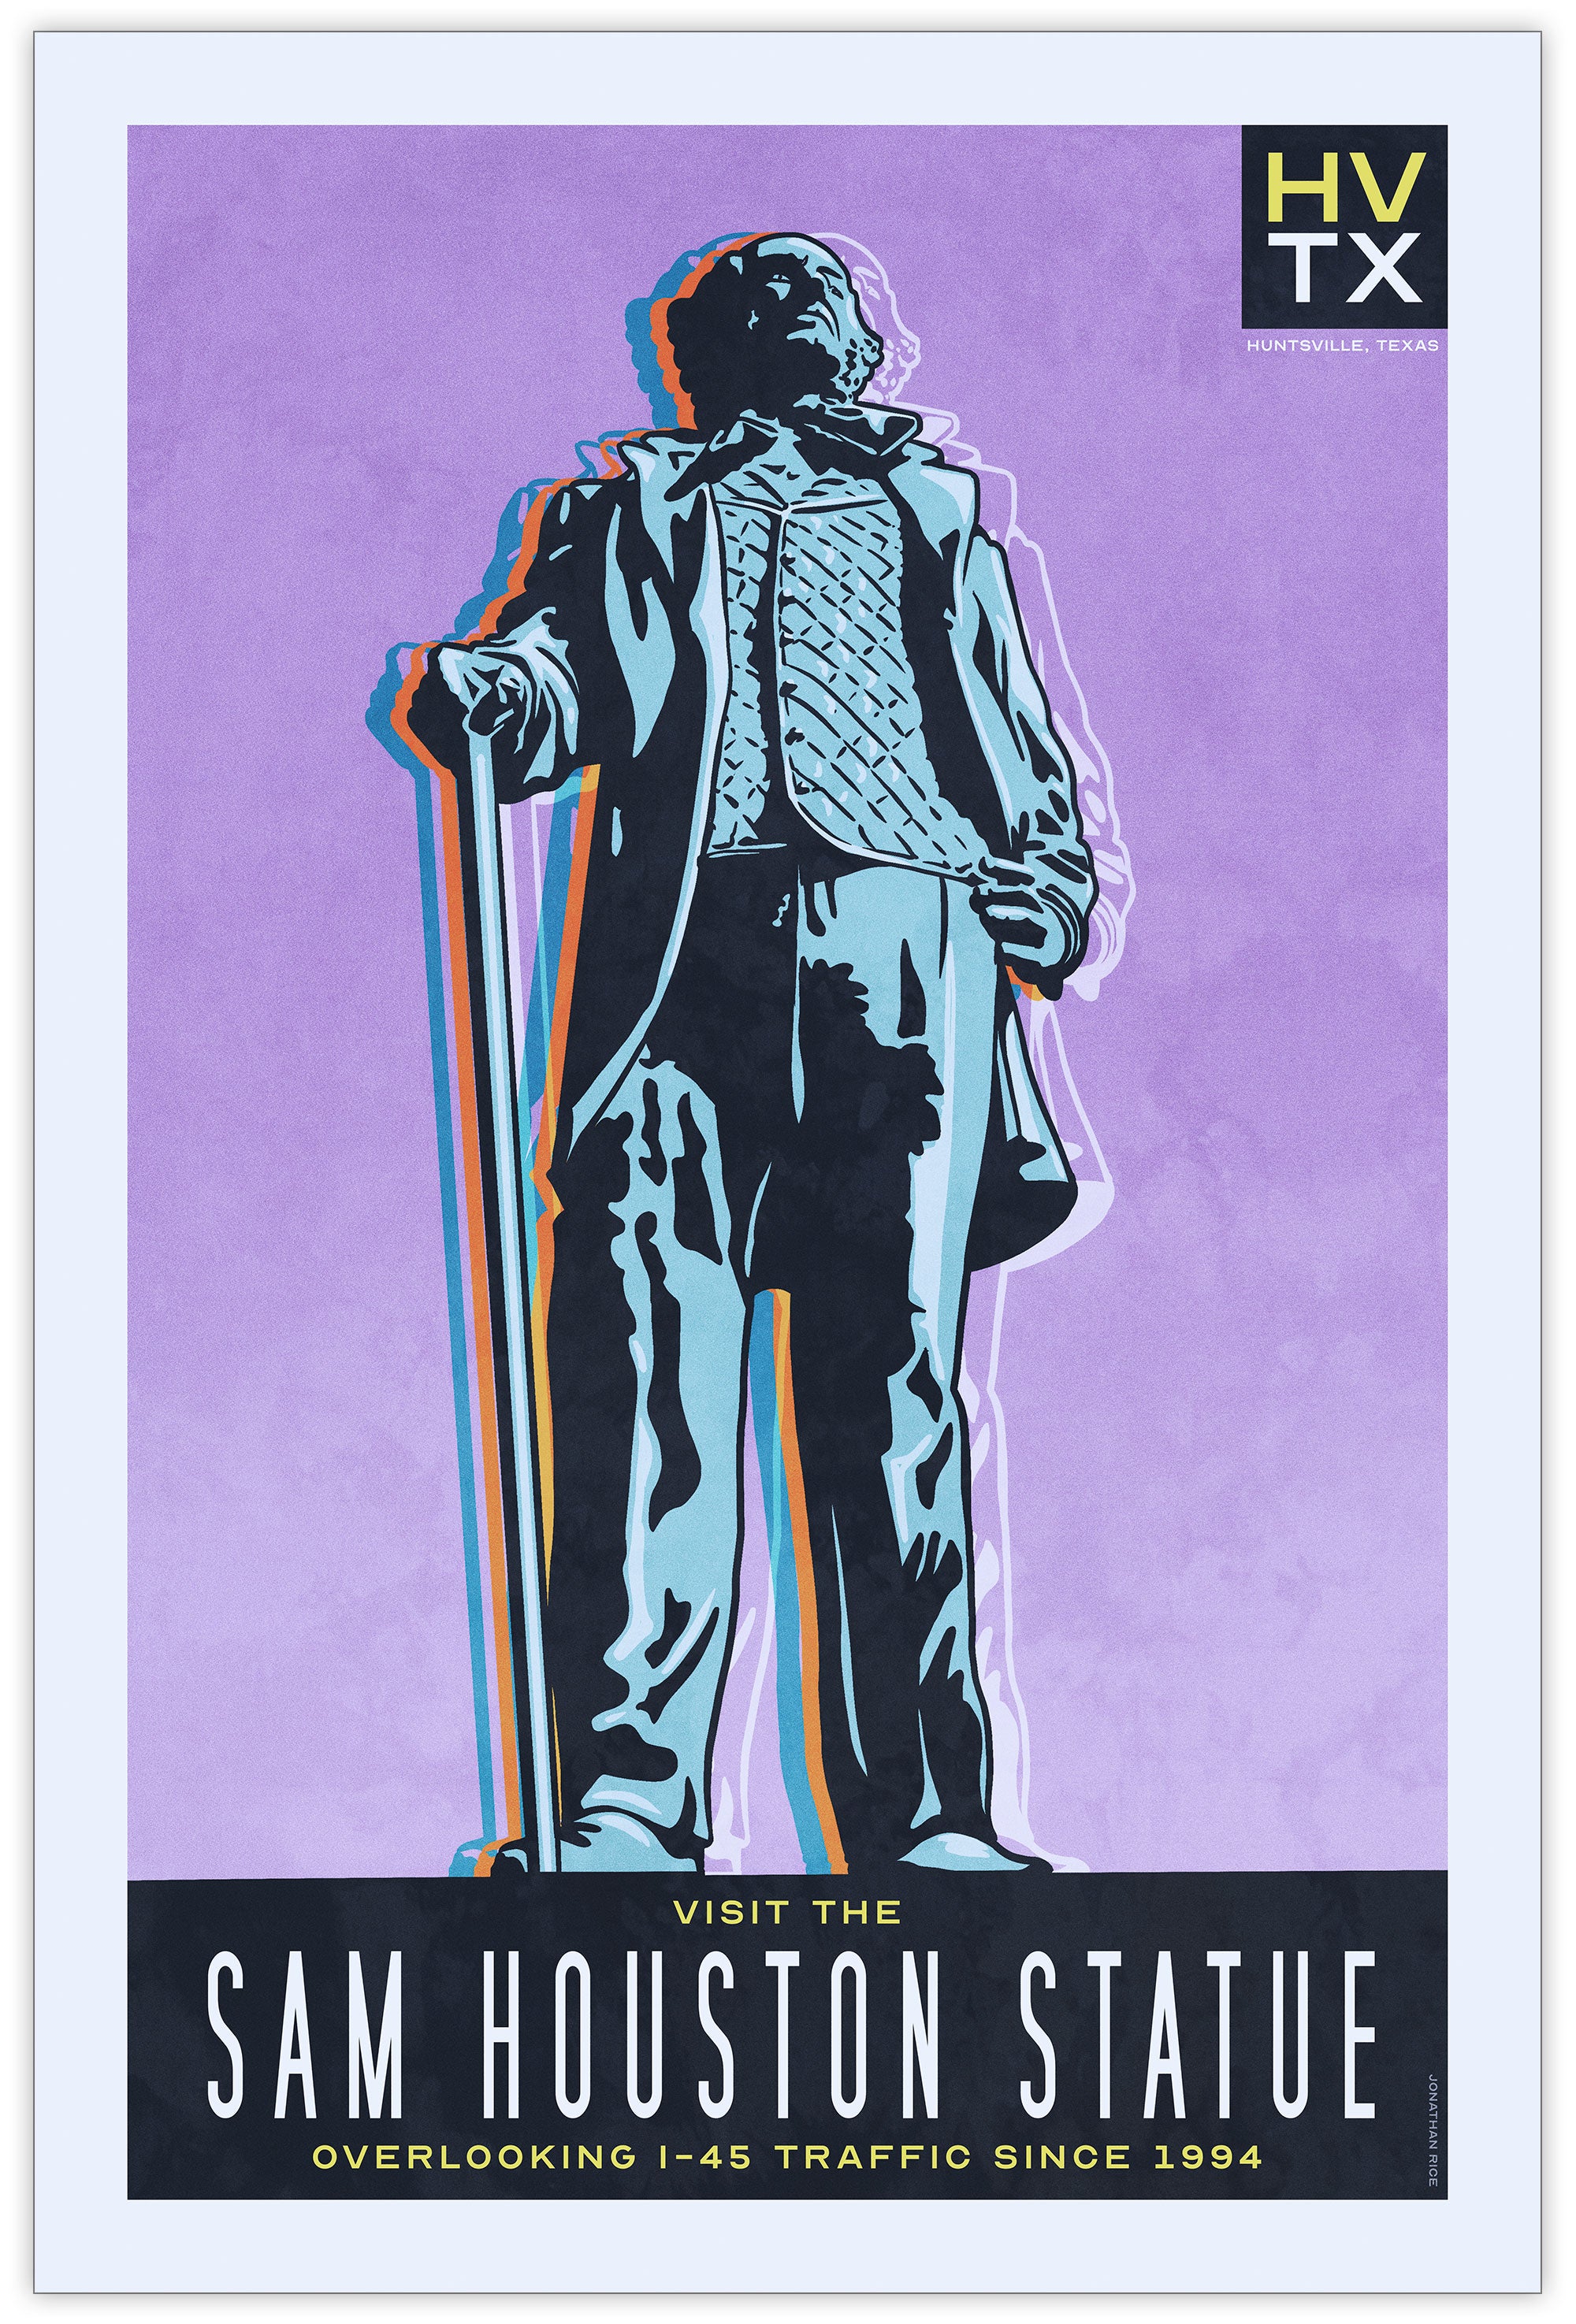 Bold graphic giclée art print of the giant Sam Houston statue with the words “Visit the Sam Houston Statue”. Print is predominately bright purple with a full-length depiction of Sam Houston on it.